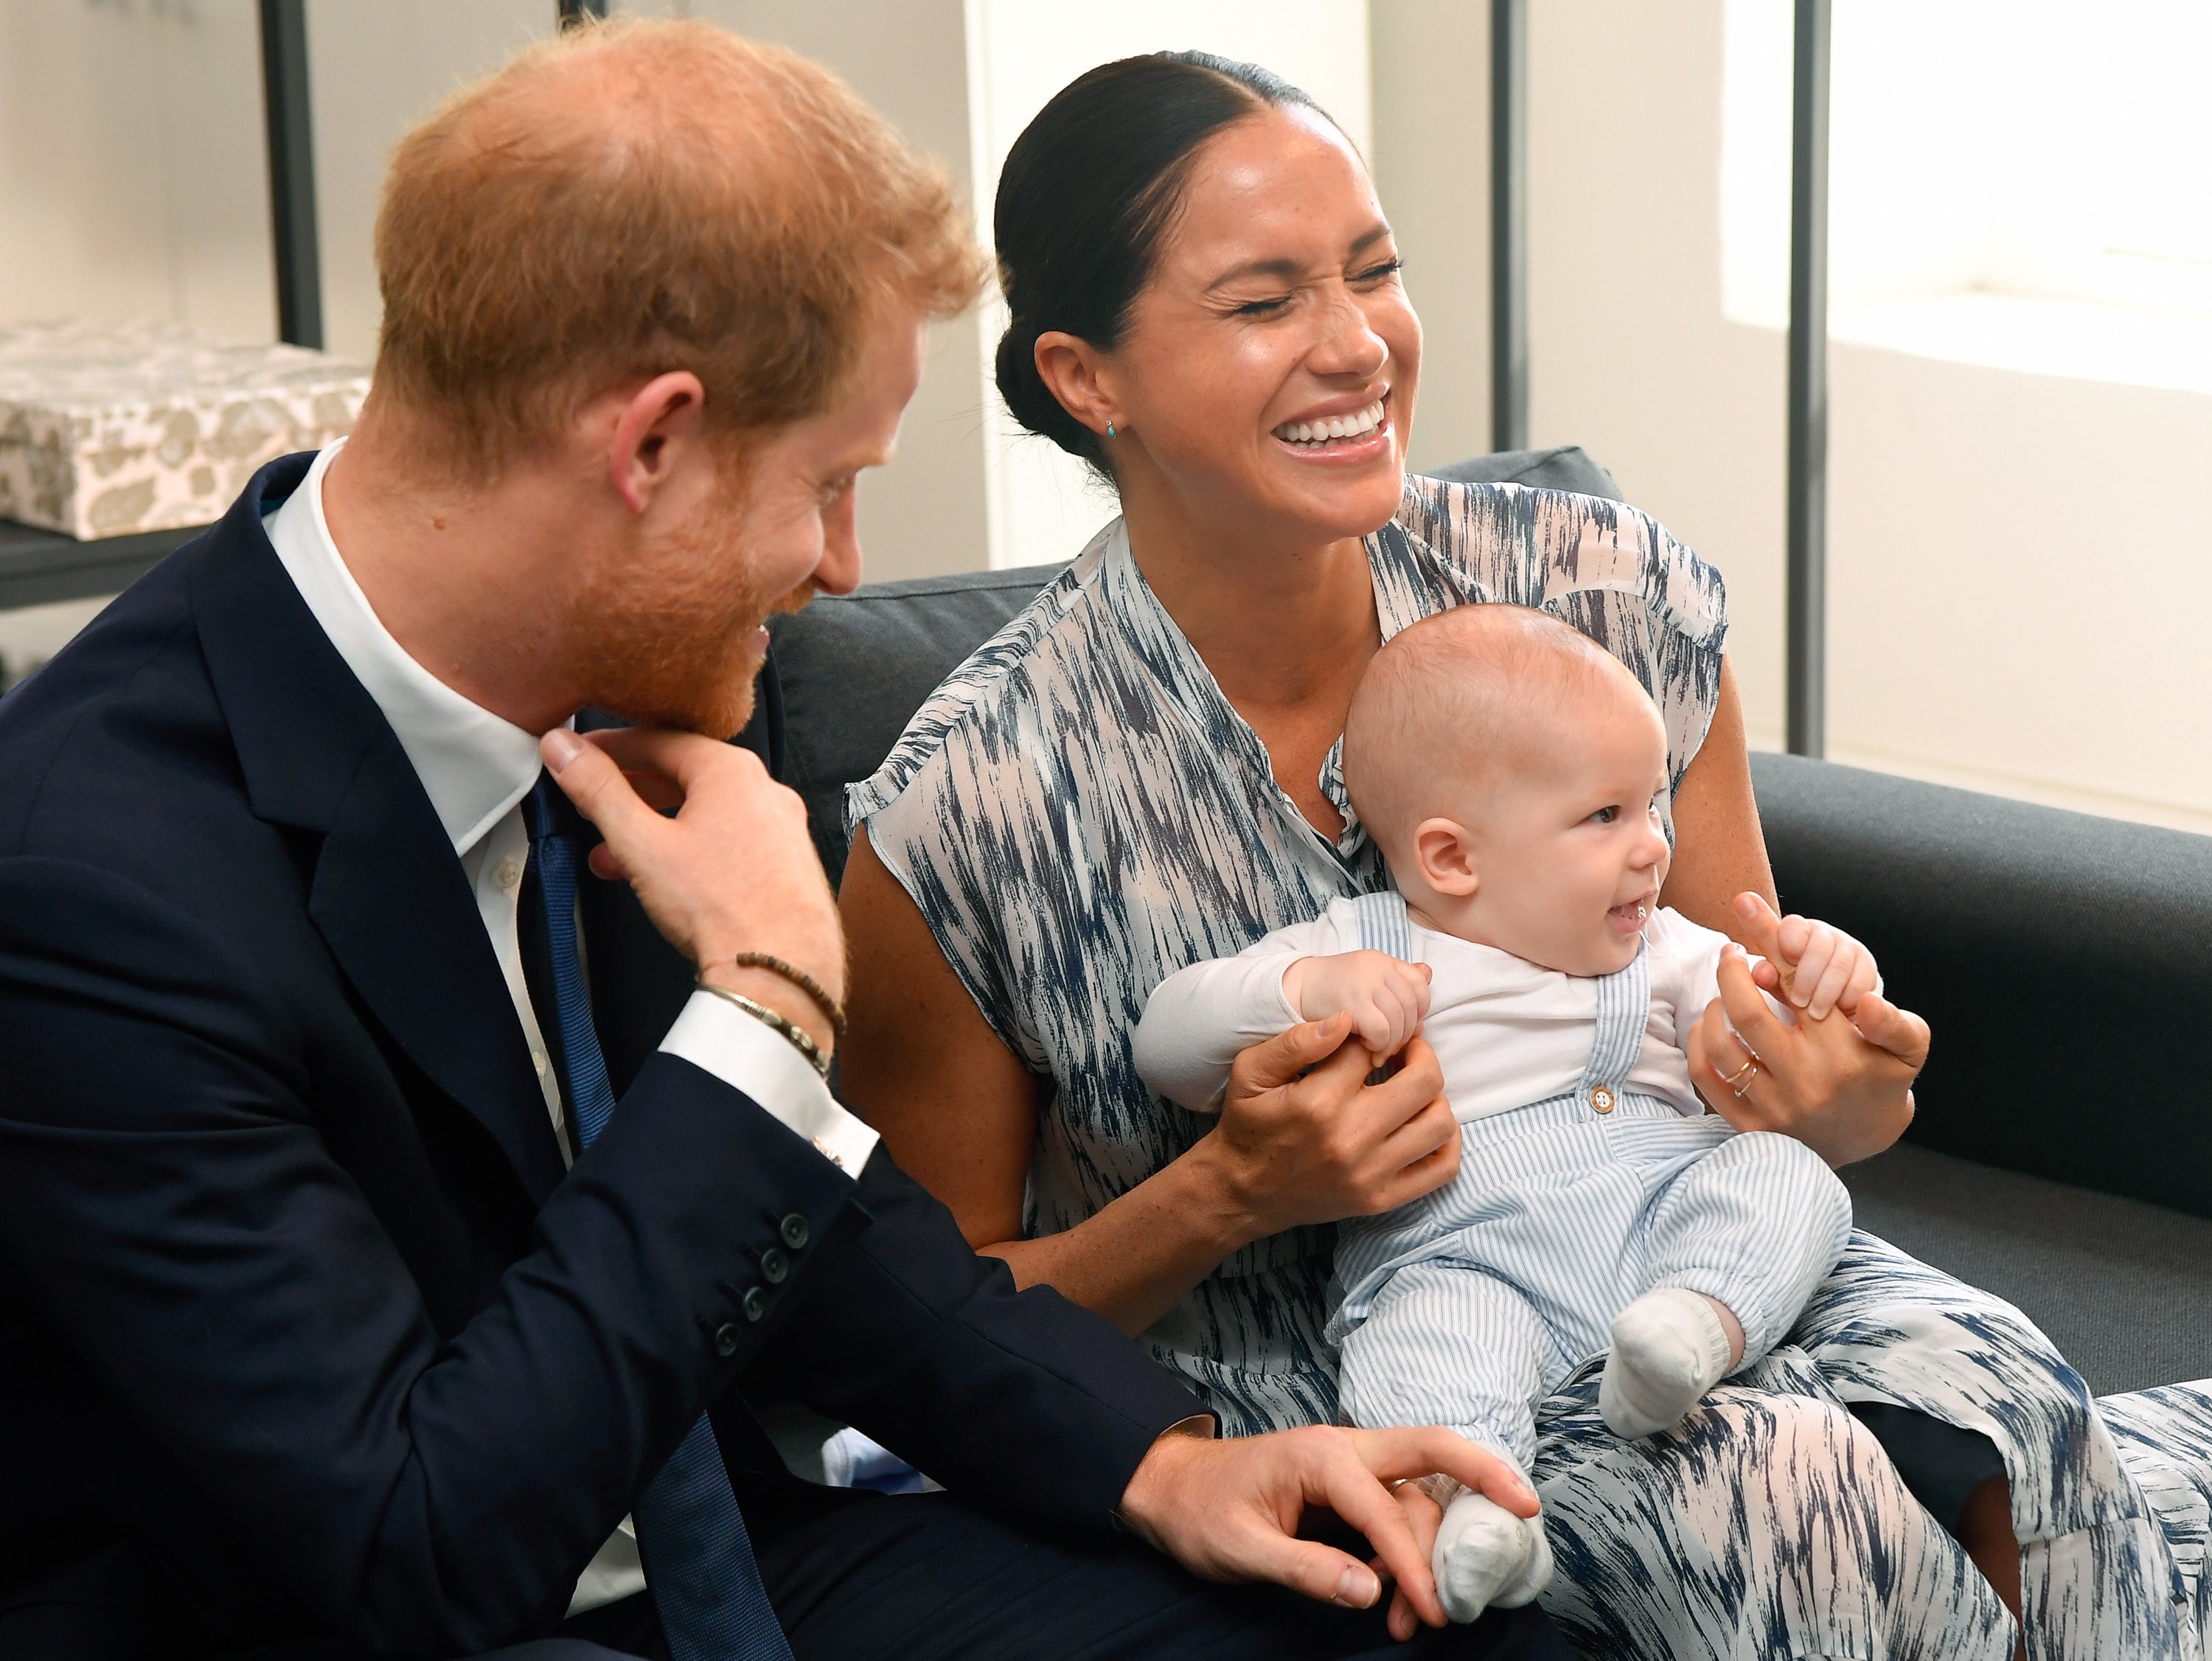 Prince Harry, and his wife Meghan Markle with their son Archie Harrison Mountbatten-Windsor on September 25, 2019 in Cape Town, South Africa | Source: Getty Images